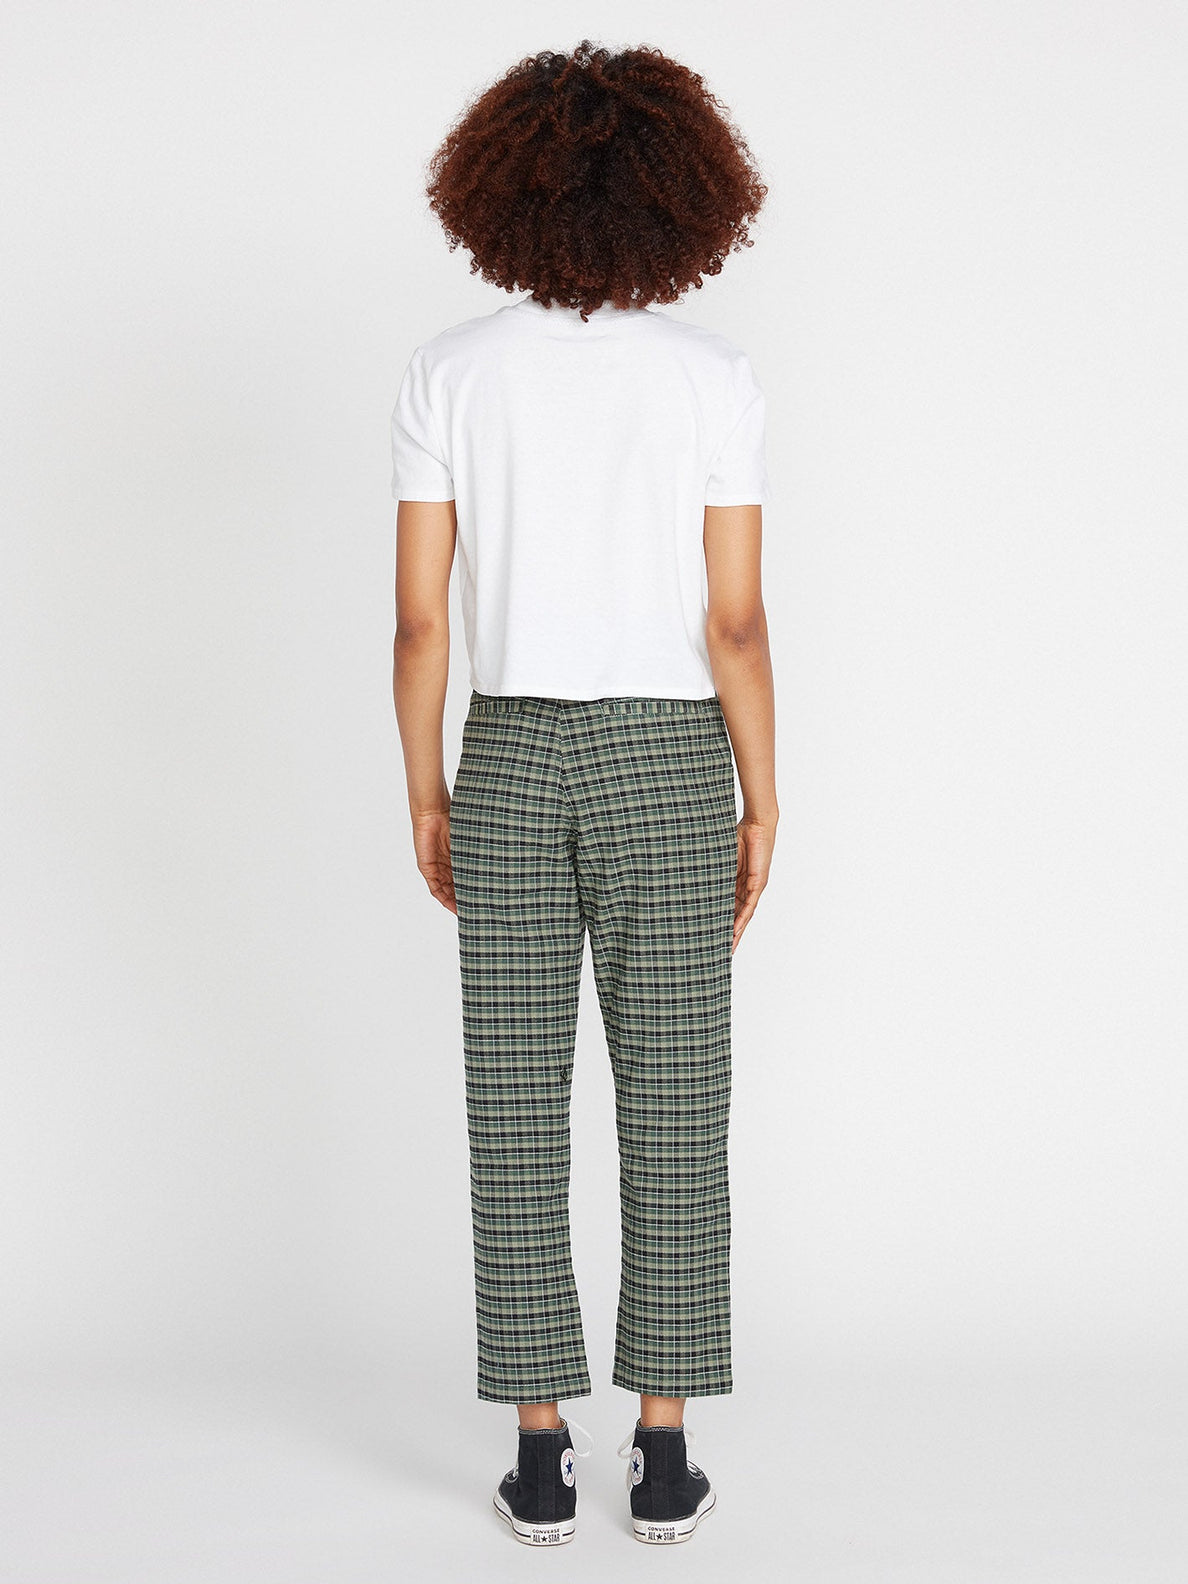 Frochickie Highrise Trousers - DARK PINE (B1131809_DPN) [2]